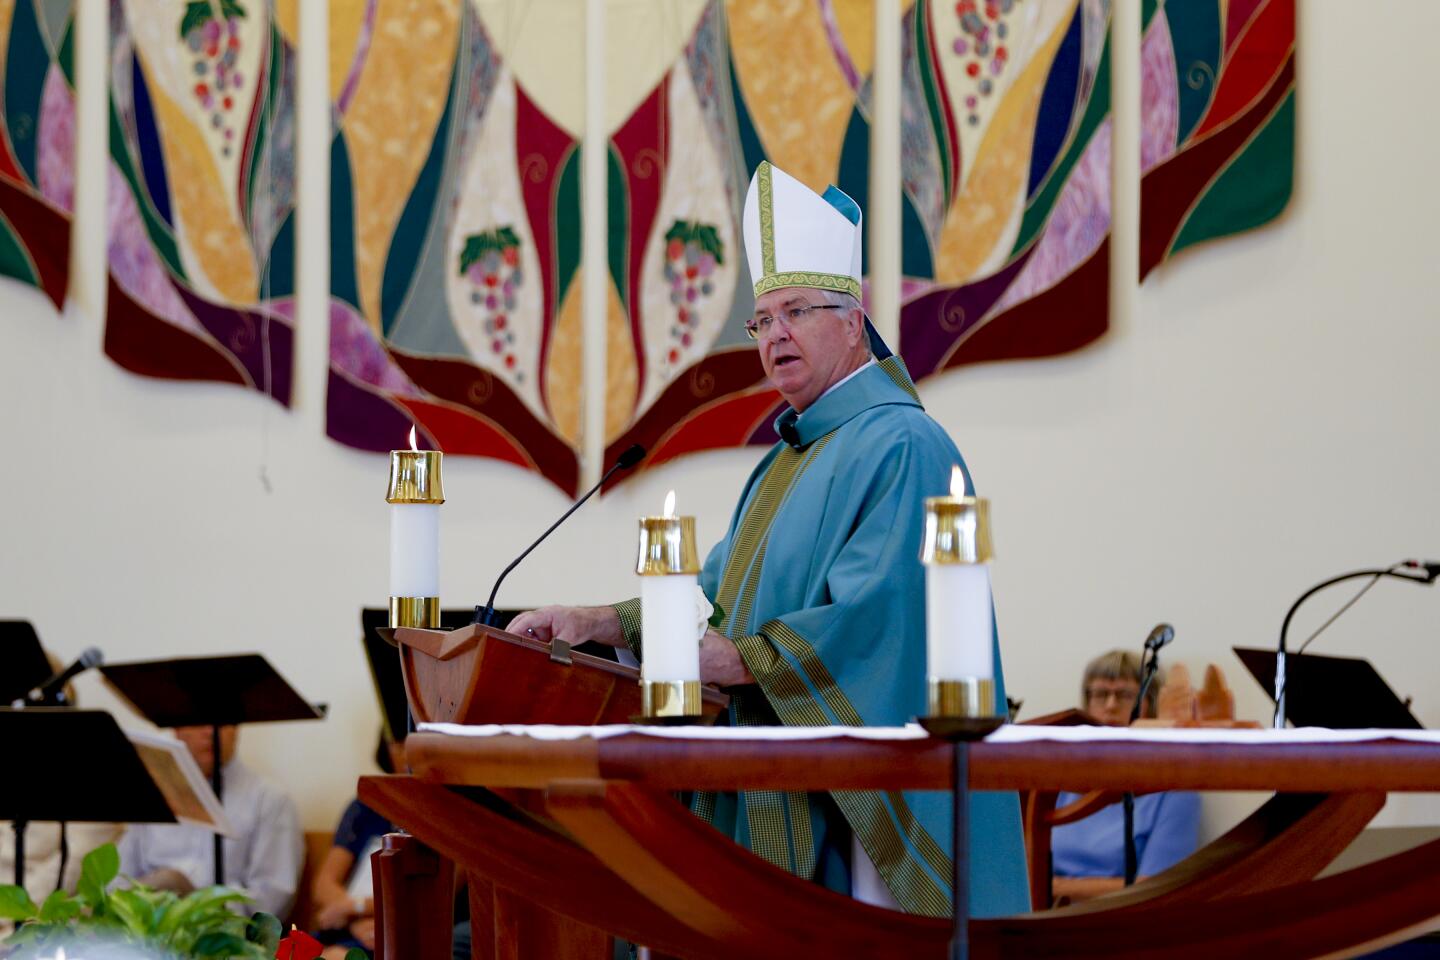 Rev. John P. Dolan, auxiliary bishop of the Roman Catholic Diocese of San Diego during Mass for Survivors of Suicide Loss at Our Mother of Confidence this past Sunday, September 22, 2019.